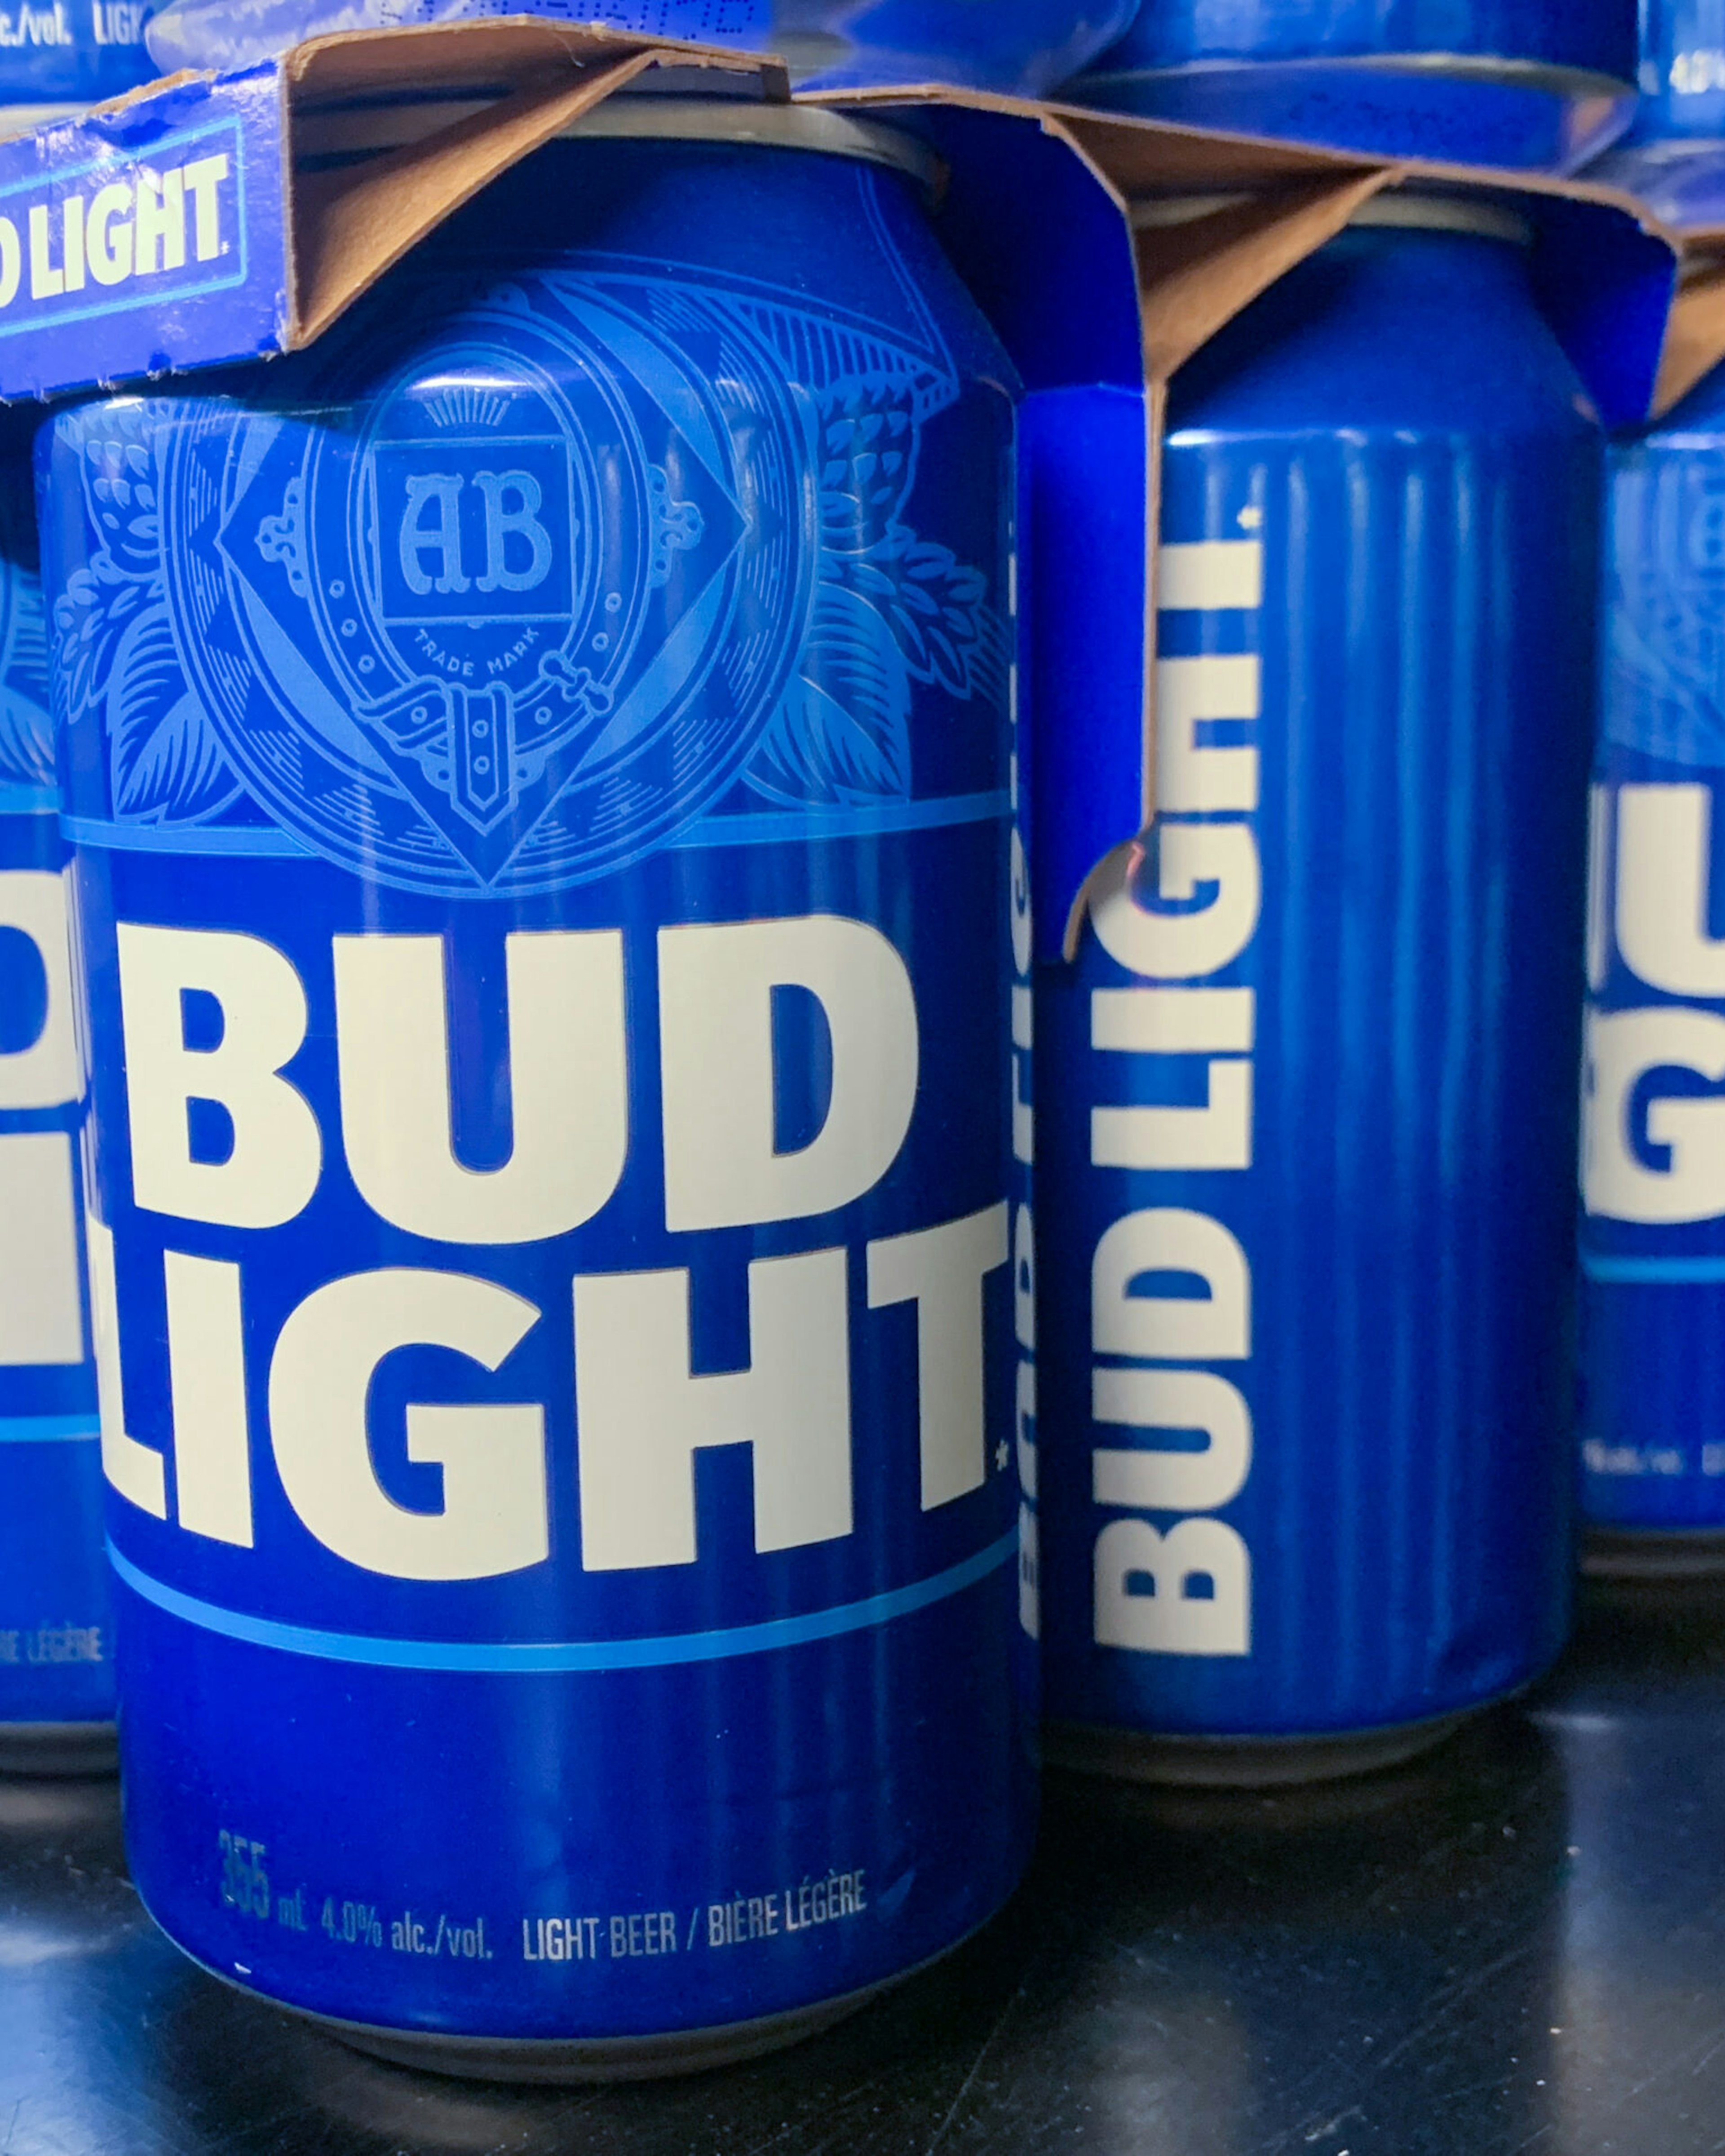 Bud Light cans are seen in the store in Montreal, Canada on June 16, 2023. (Photo by Jakub Porzycki/NurPhoto via Getty Images)